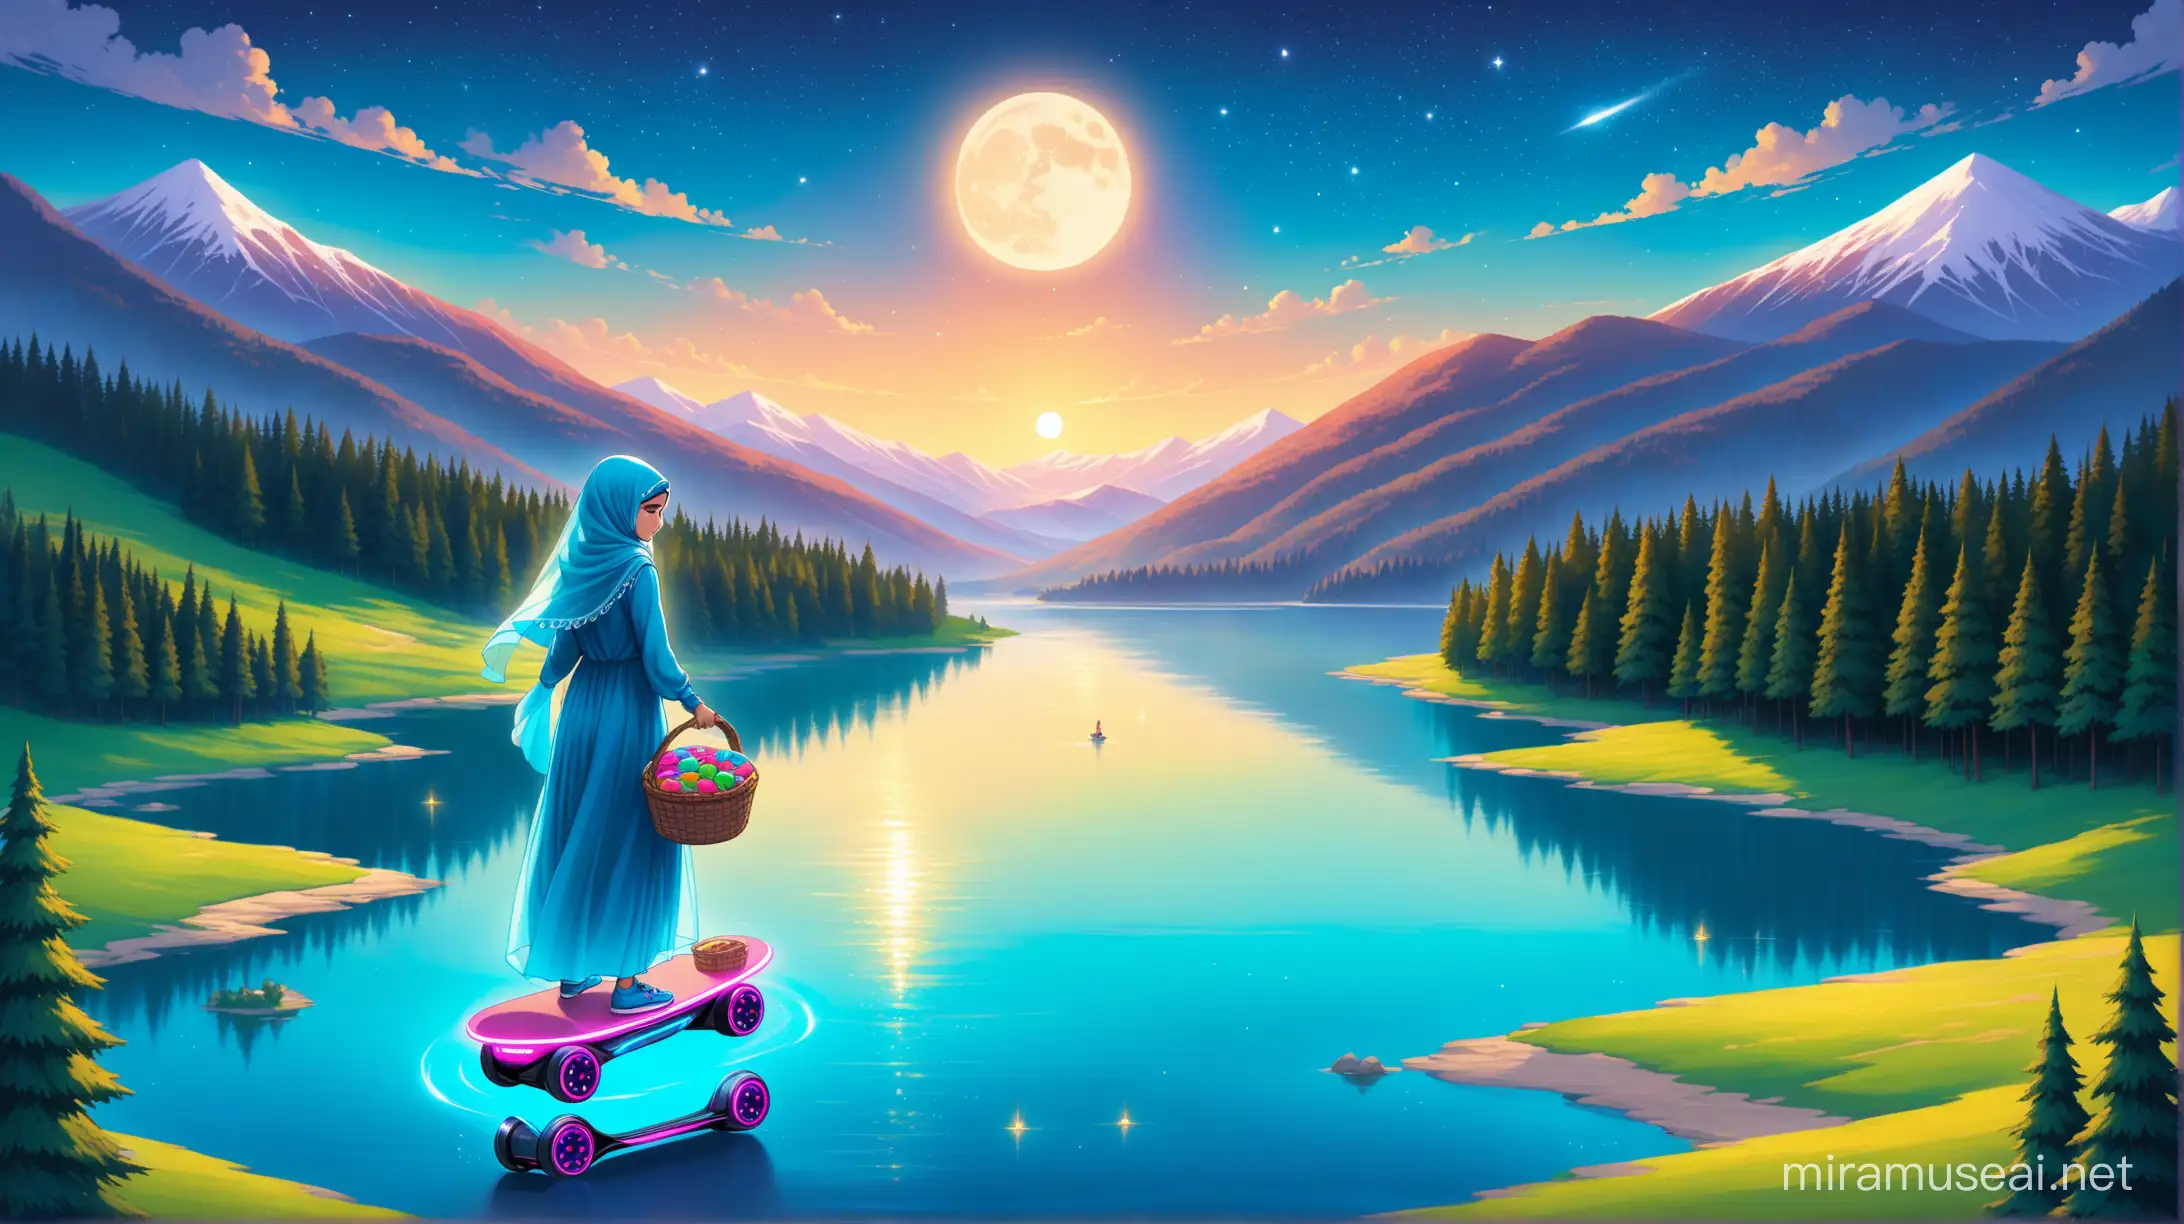 Veiled Girl on Hoverboard with Candy Basket and Ramadan Pita in Forest Setting